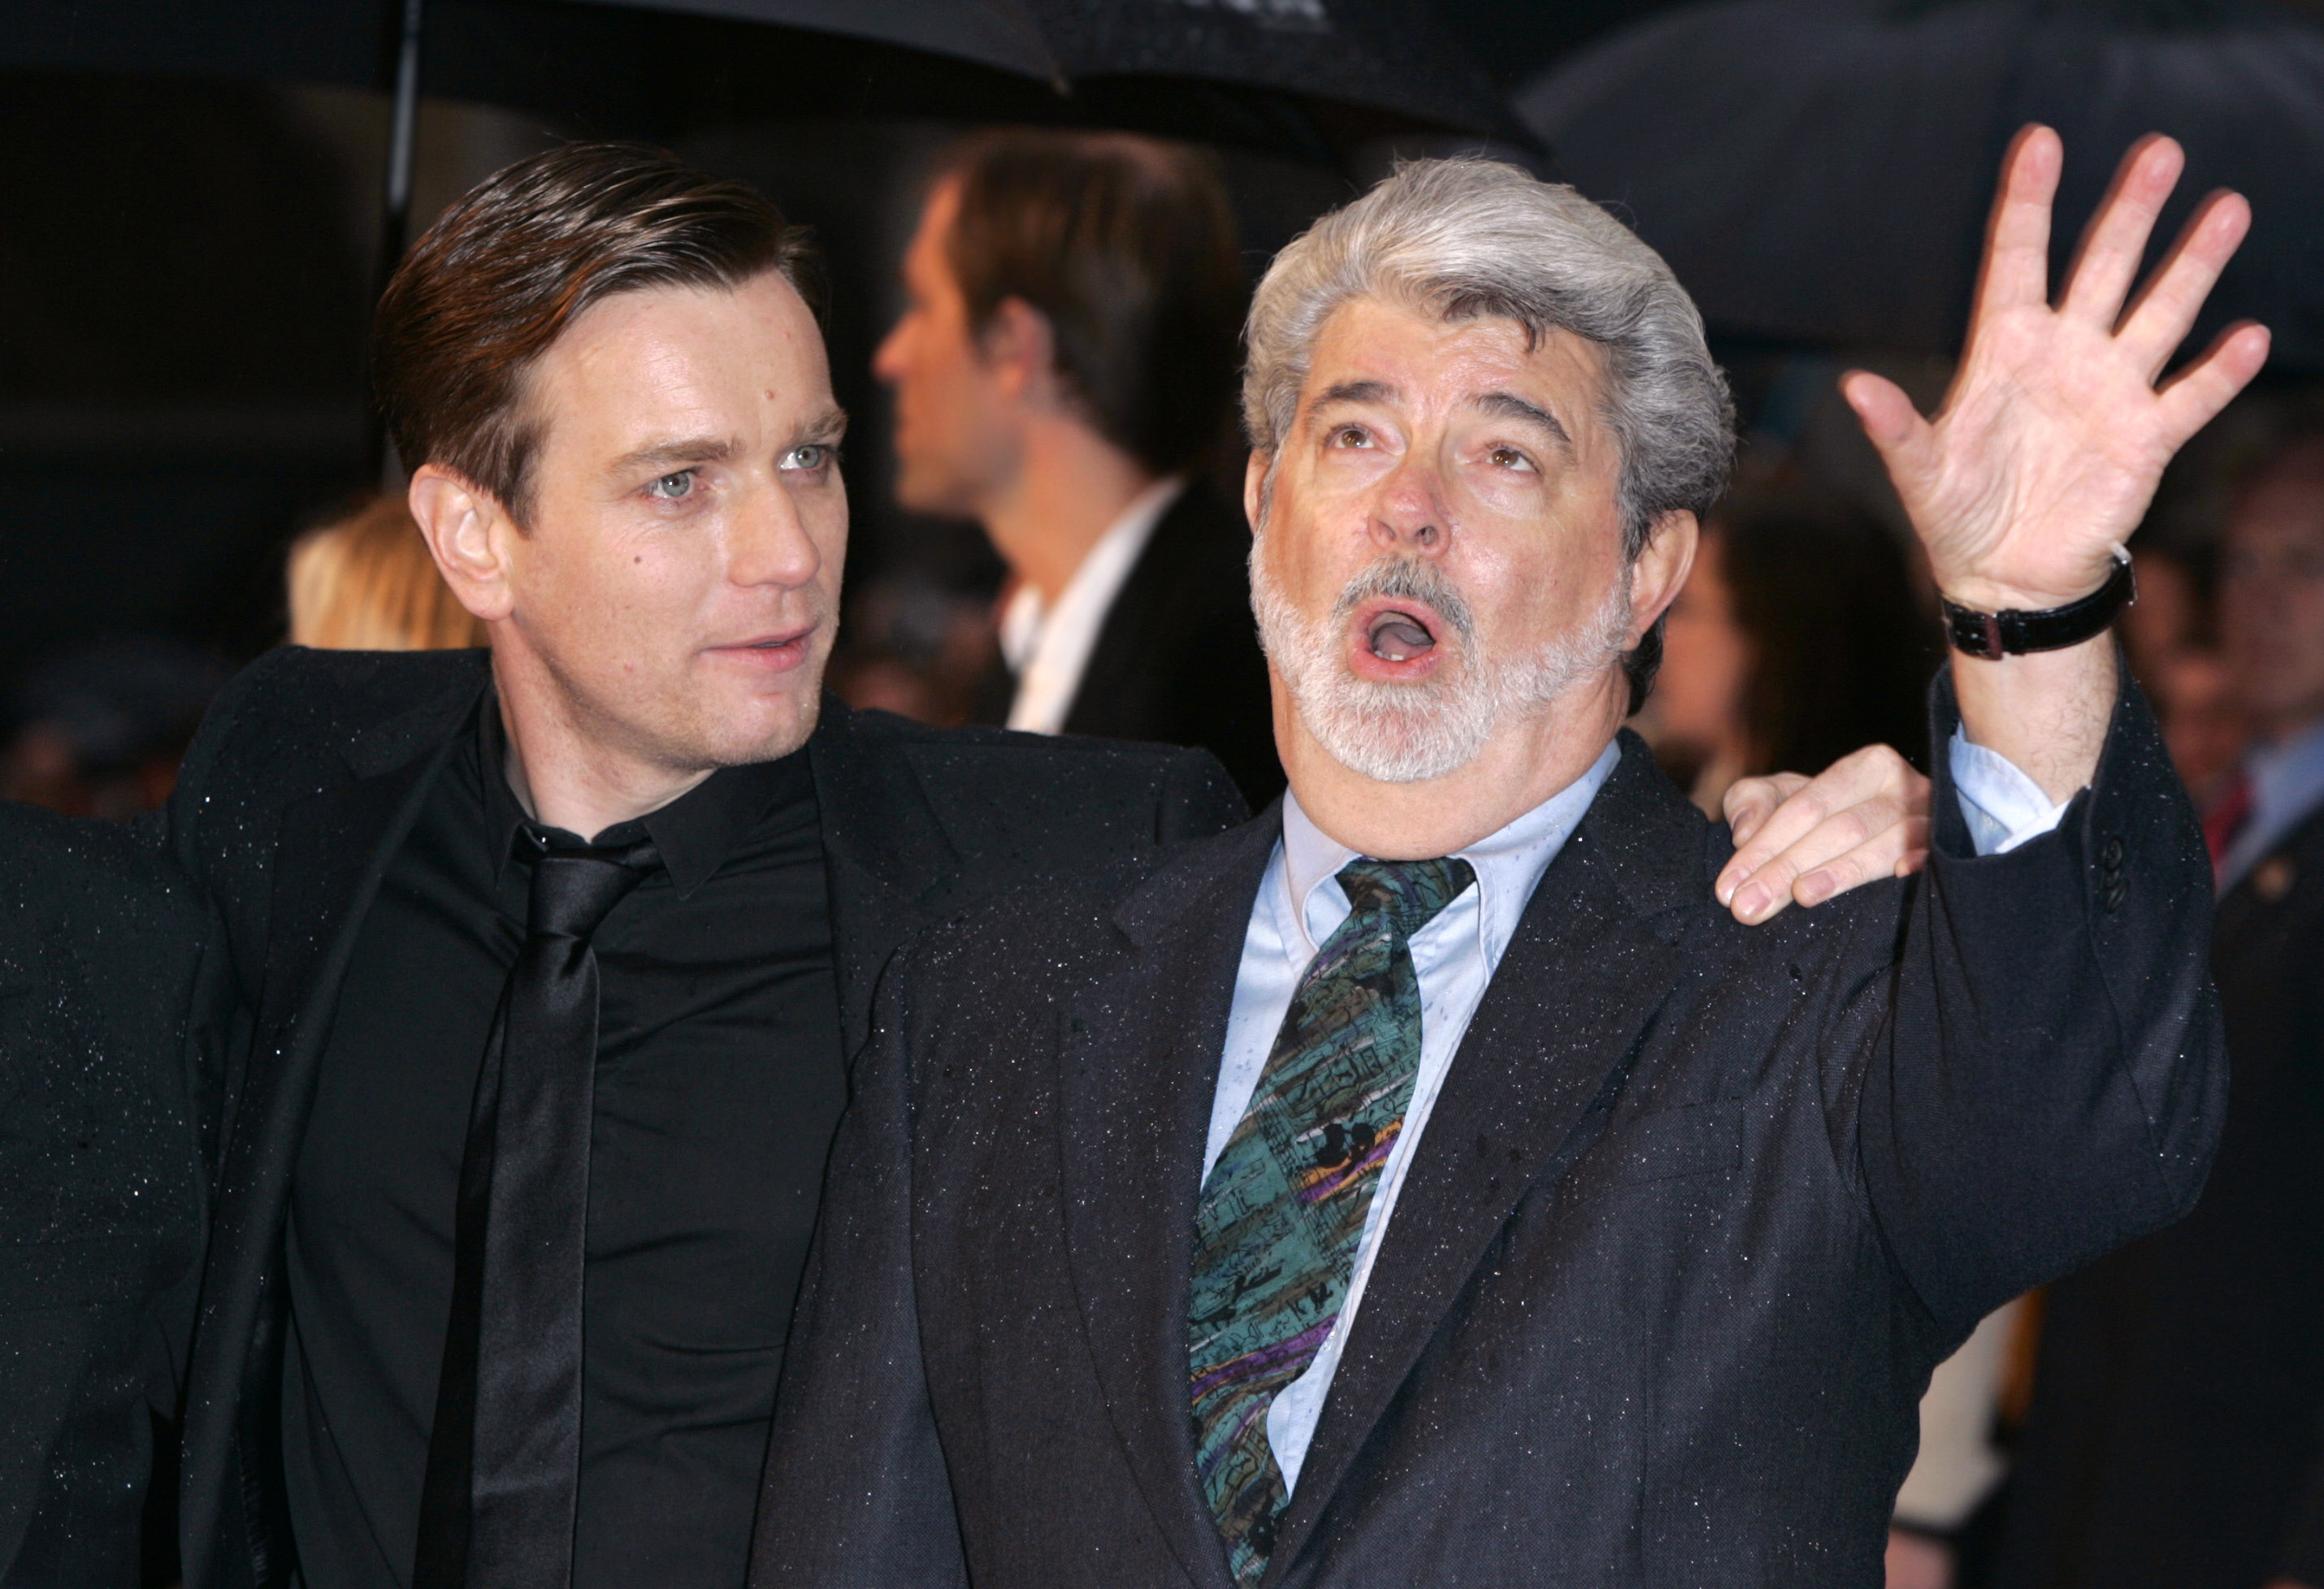 Ewan McGregor and George Lucas attend The Star Wars: Revenge Of The Sith UK  premiere in London. (Justin Goff—UK Press via Getty Images)